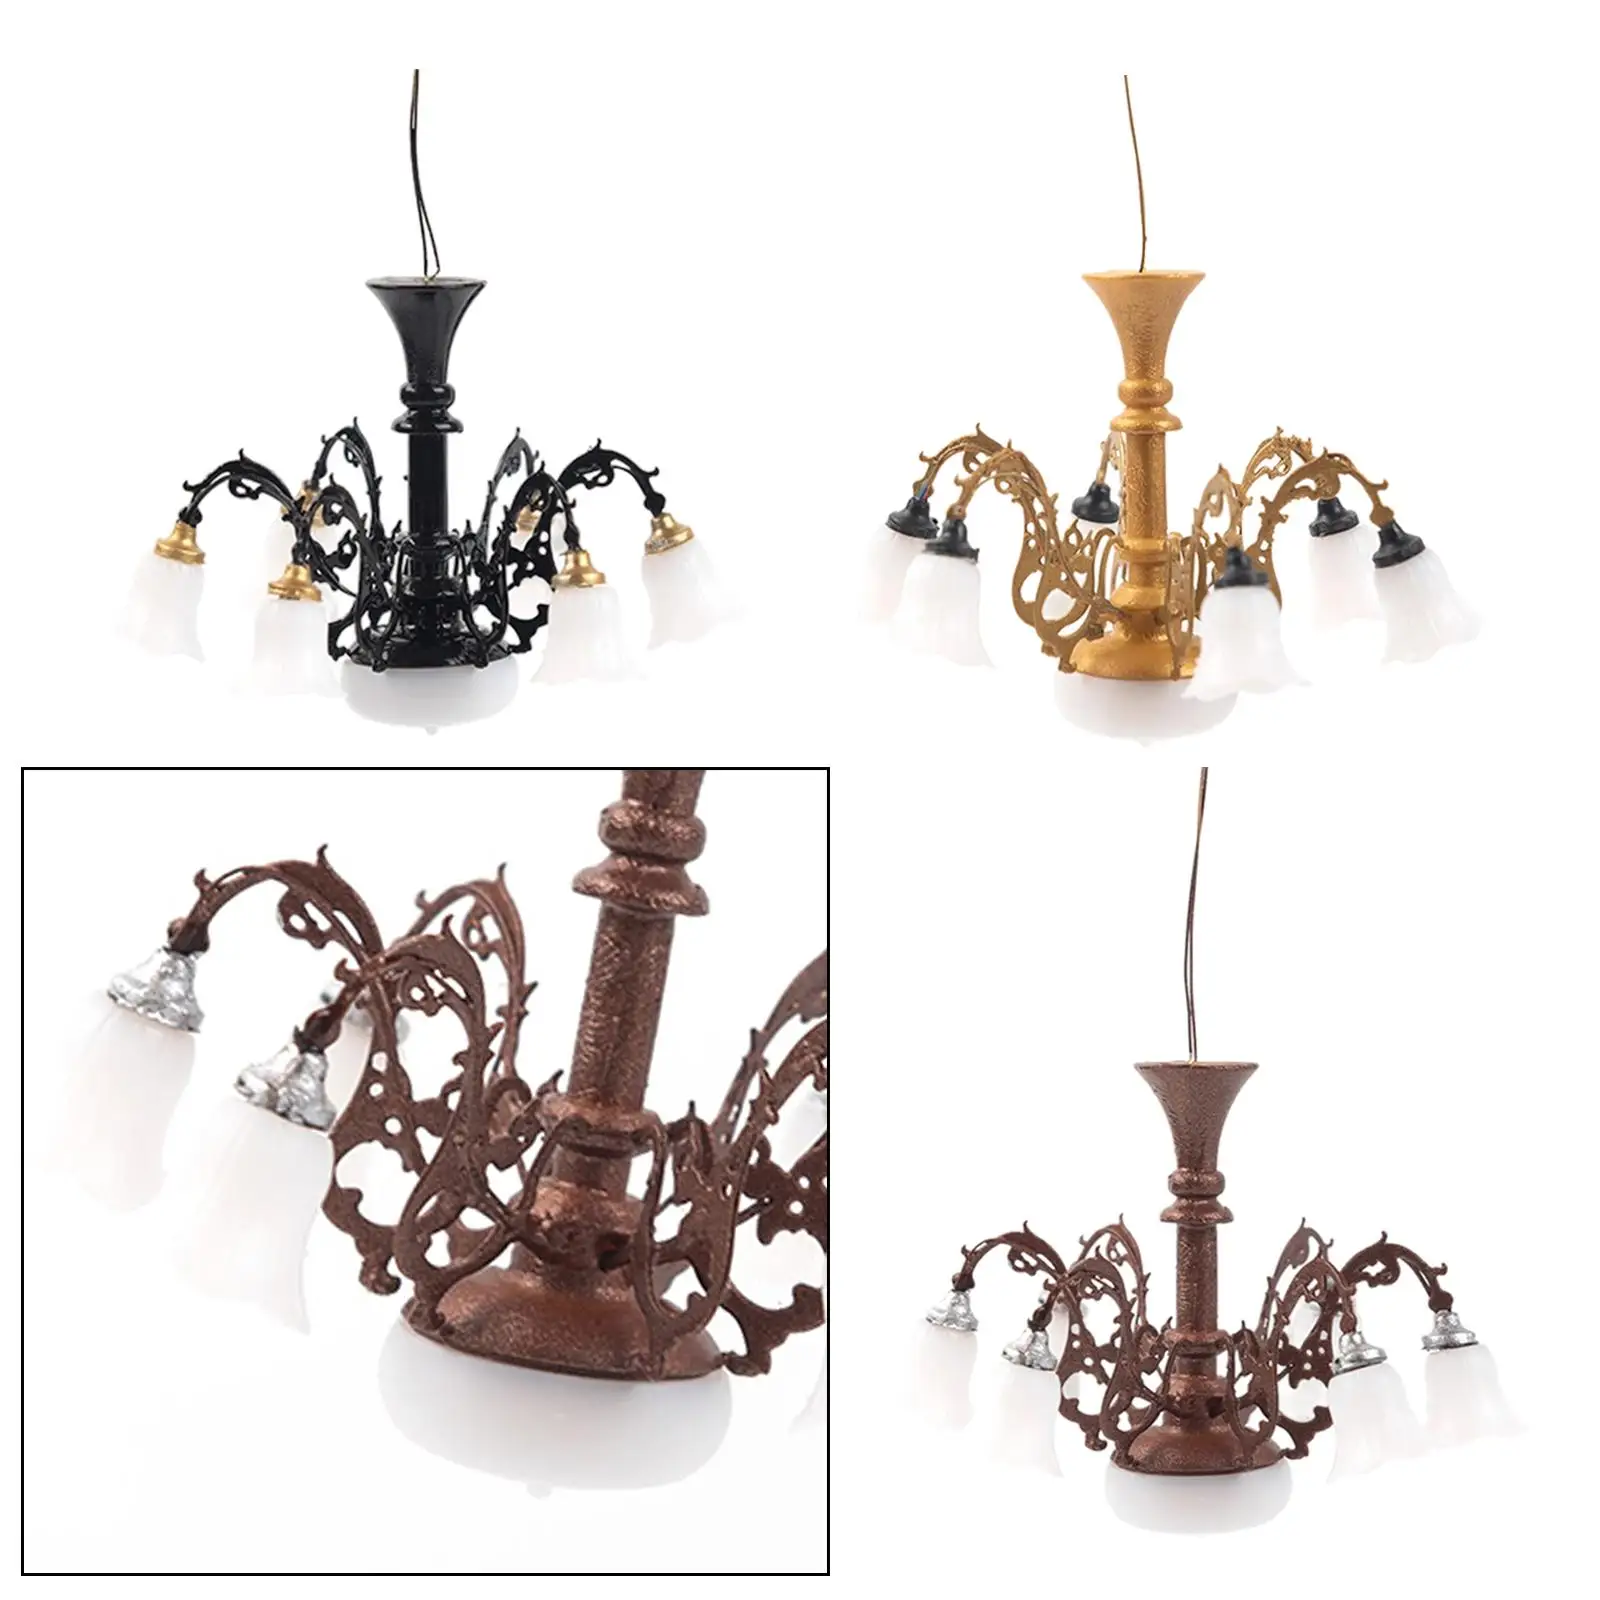 1/87 Scale Chandelier 3V/12V Fairy Gardens Miniature Scenes Accessory Ceiling Lamp Hanging Lamp Ceiling Light Fixture Decor